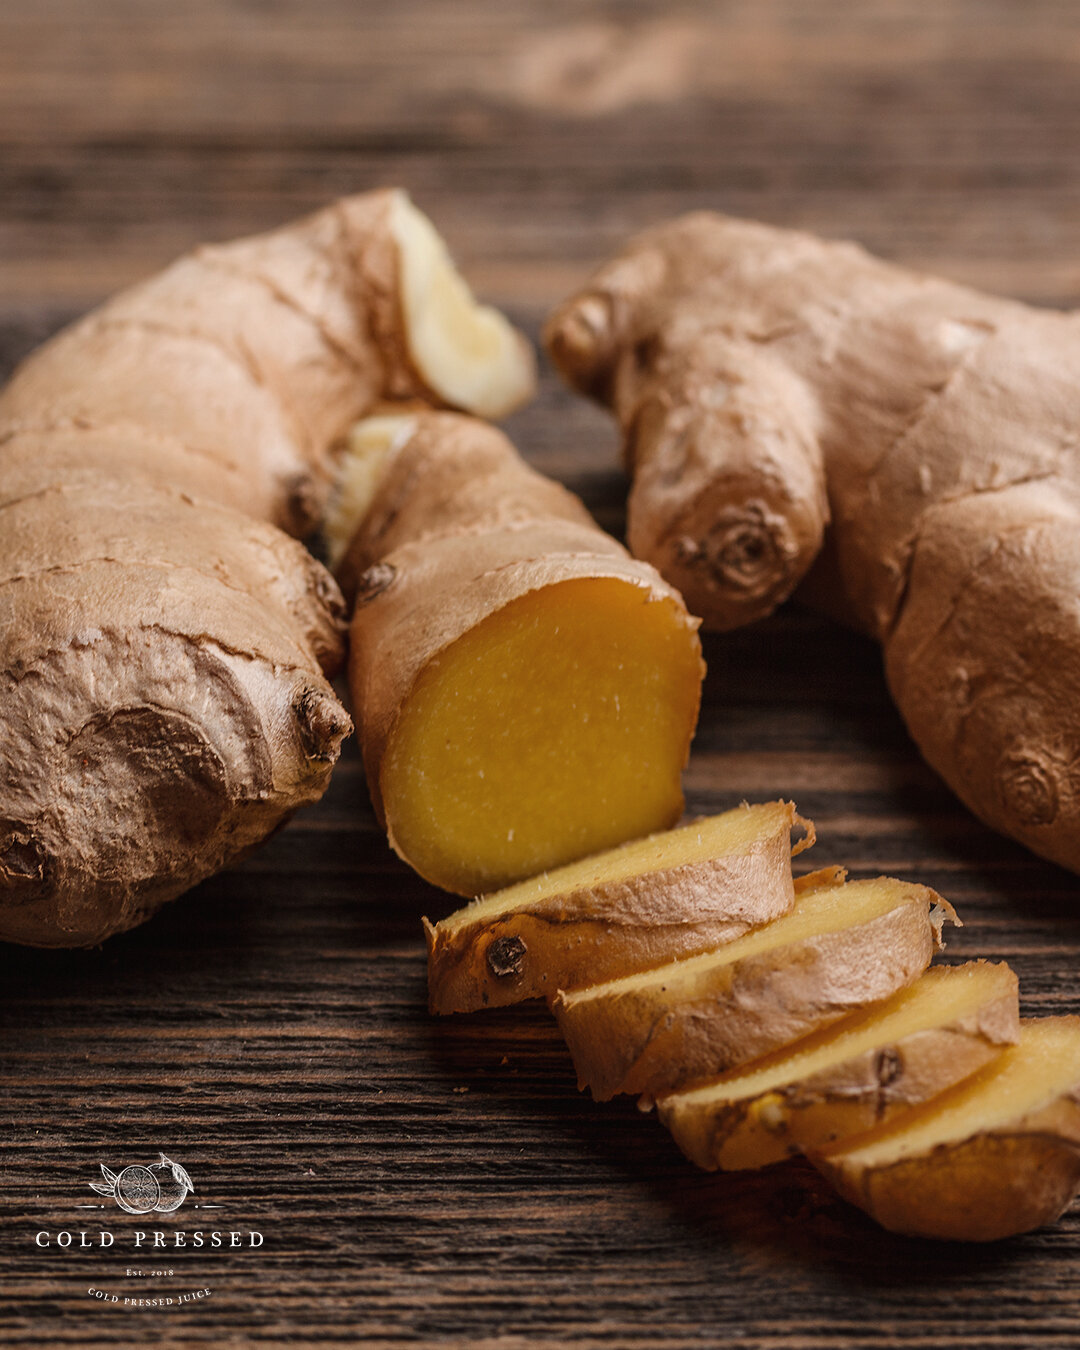 Ginger has many health benefits and is known for strengthening the immune system and helping digestion. In addition, ginger prevents cardiovascular diseases, provides healthier skin and is beneficial for weight reduction. Many also highlight the anti